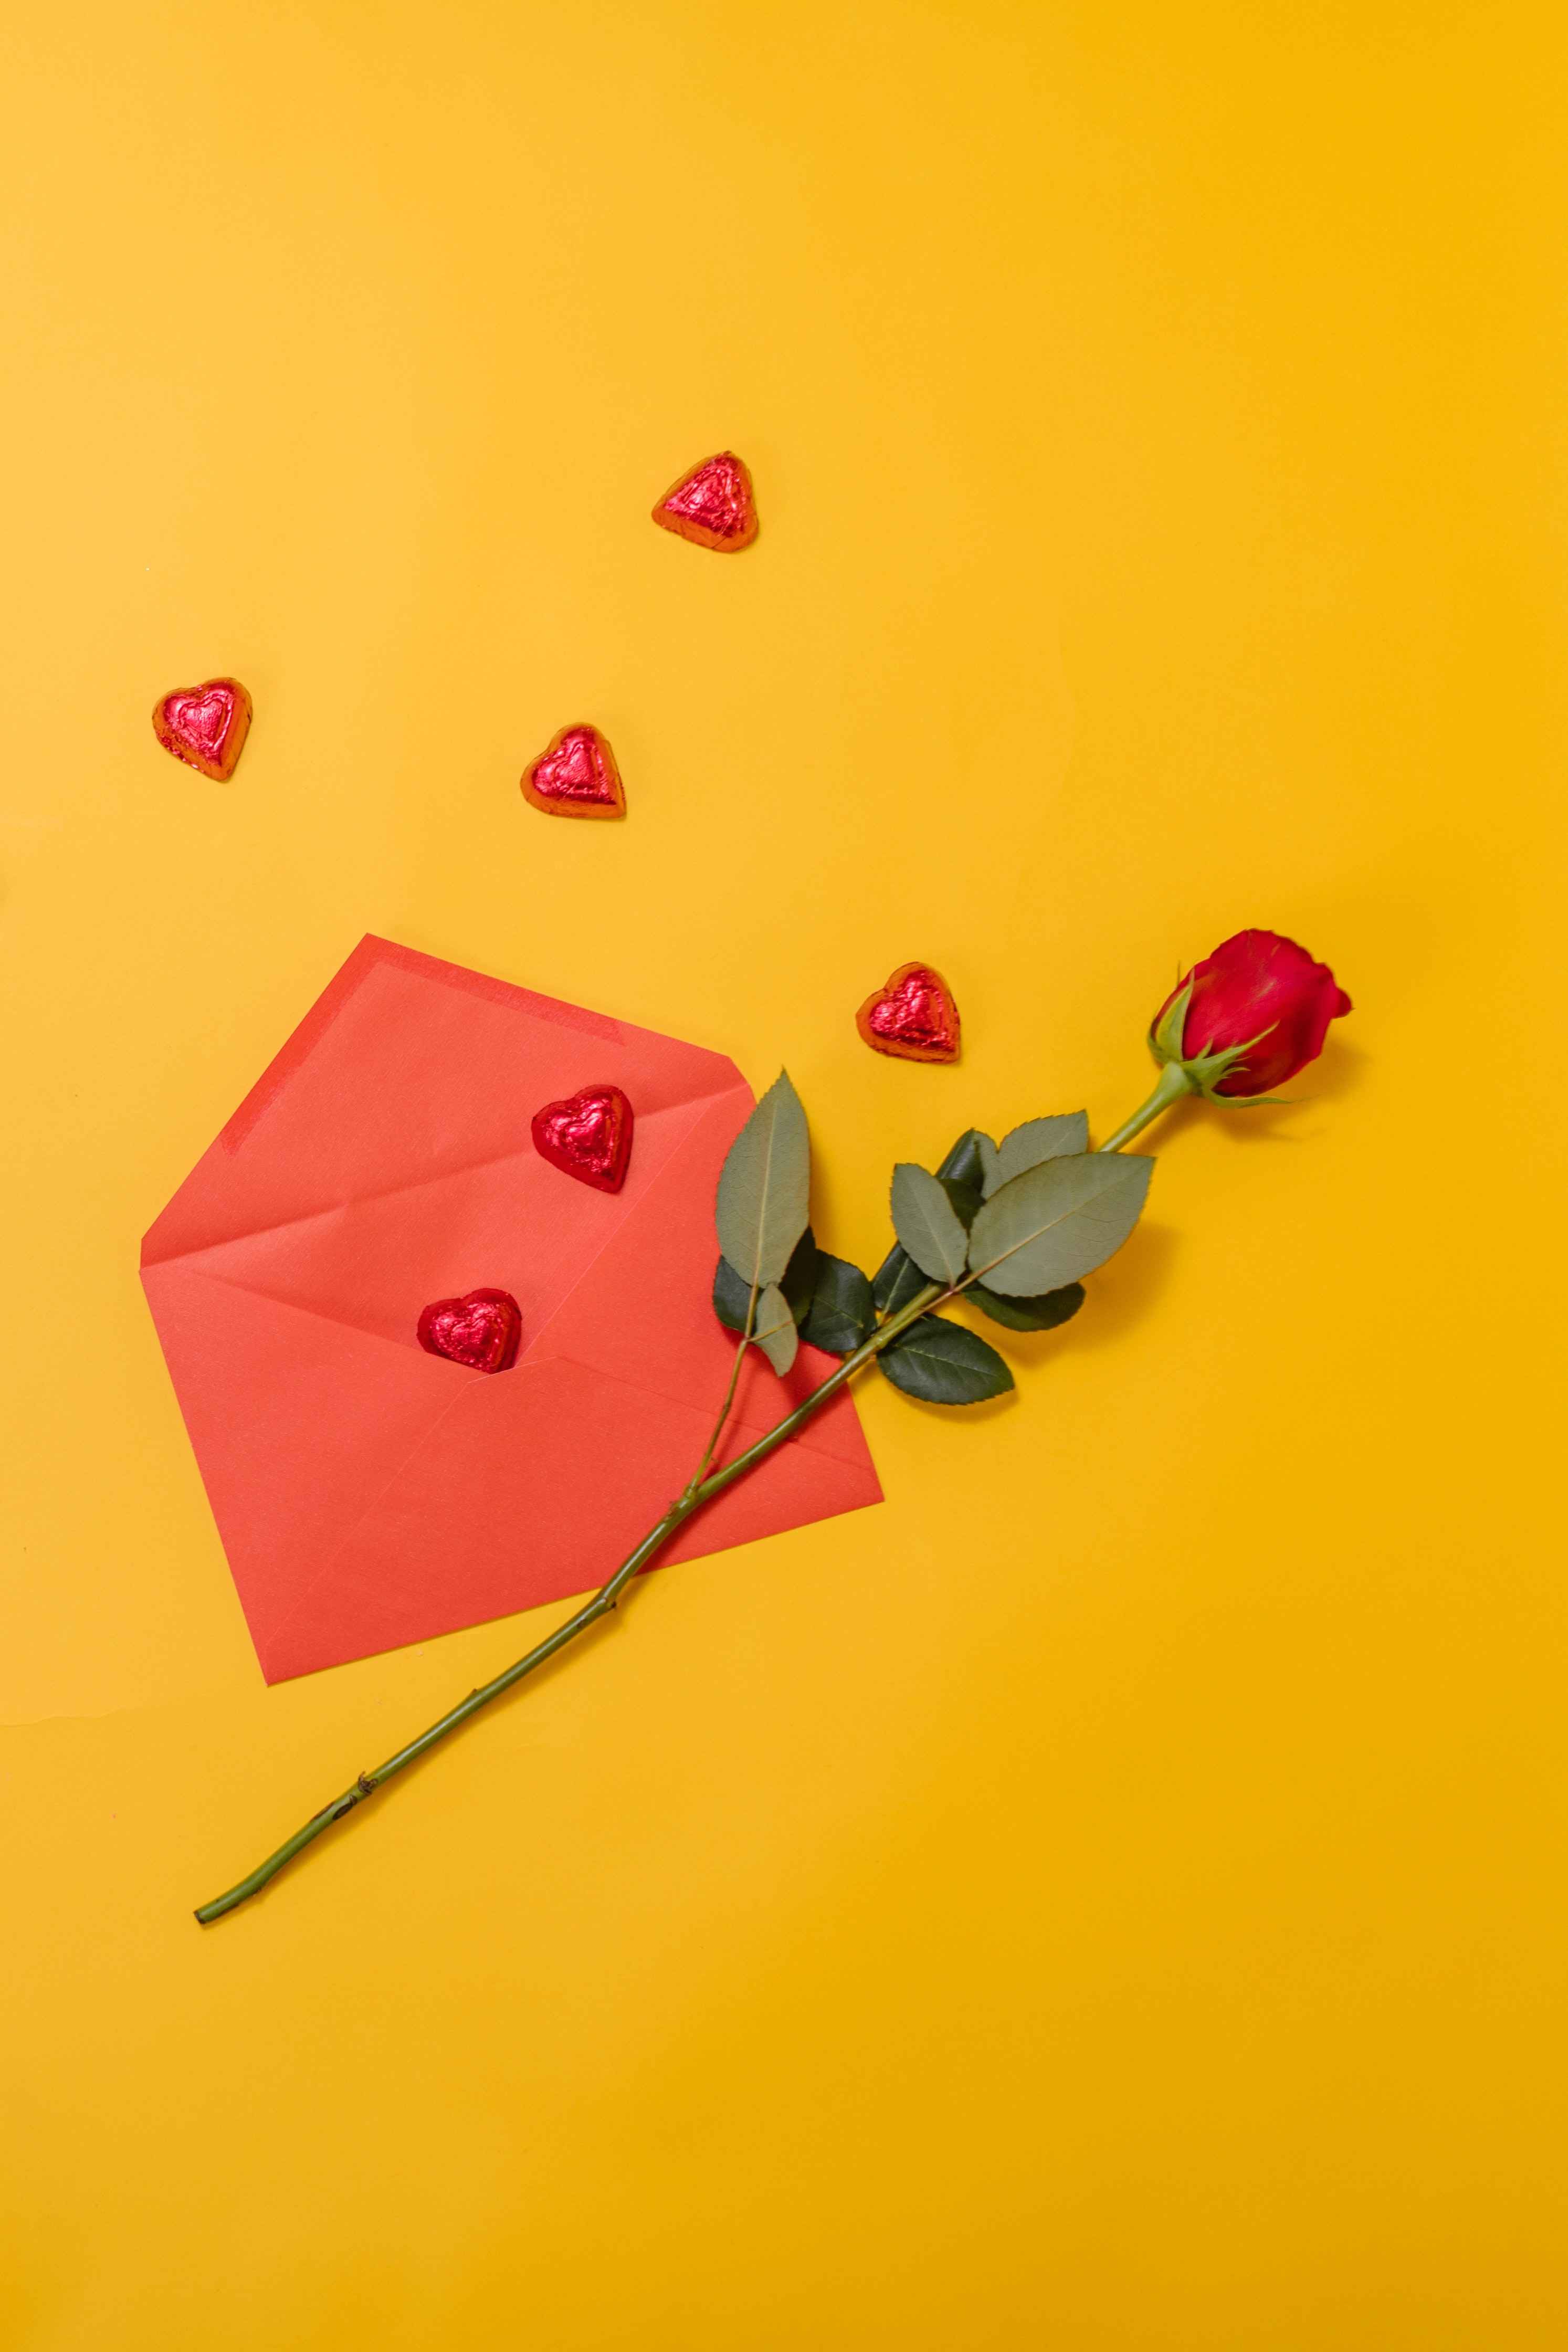 The classic way to celebrate Valentine's Day is by sending a letter